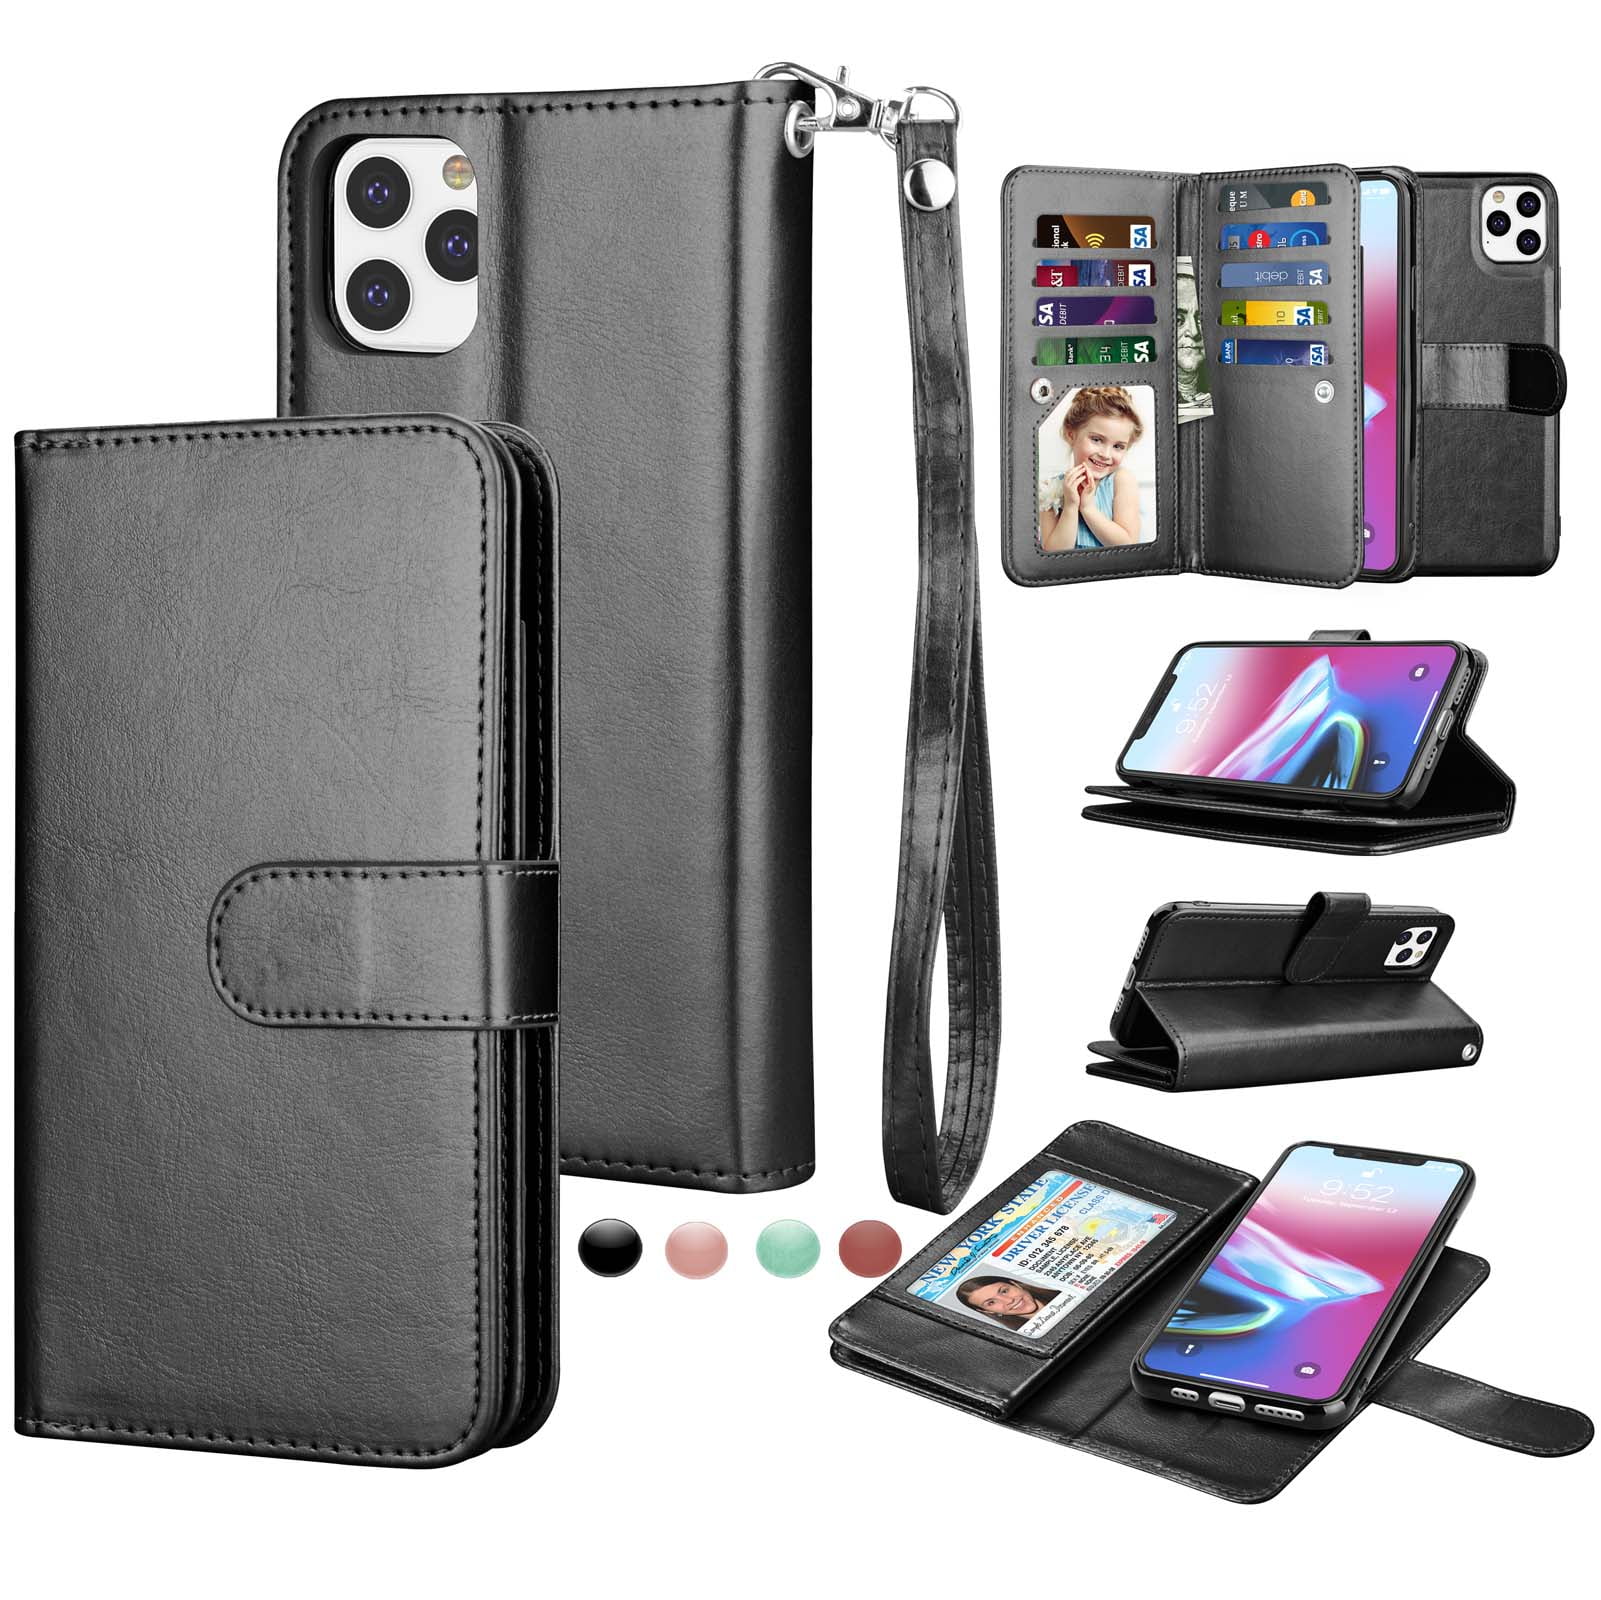 Business Wallet Cover Compatible with iPhone 11 Pro Smartphone Shockproof Leather Flip Case for iPhone 11 Pro 